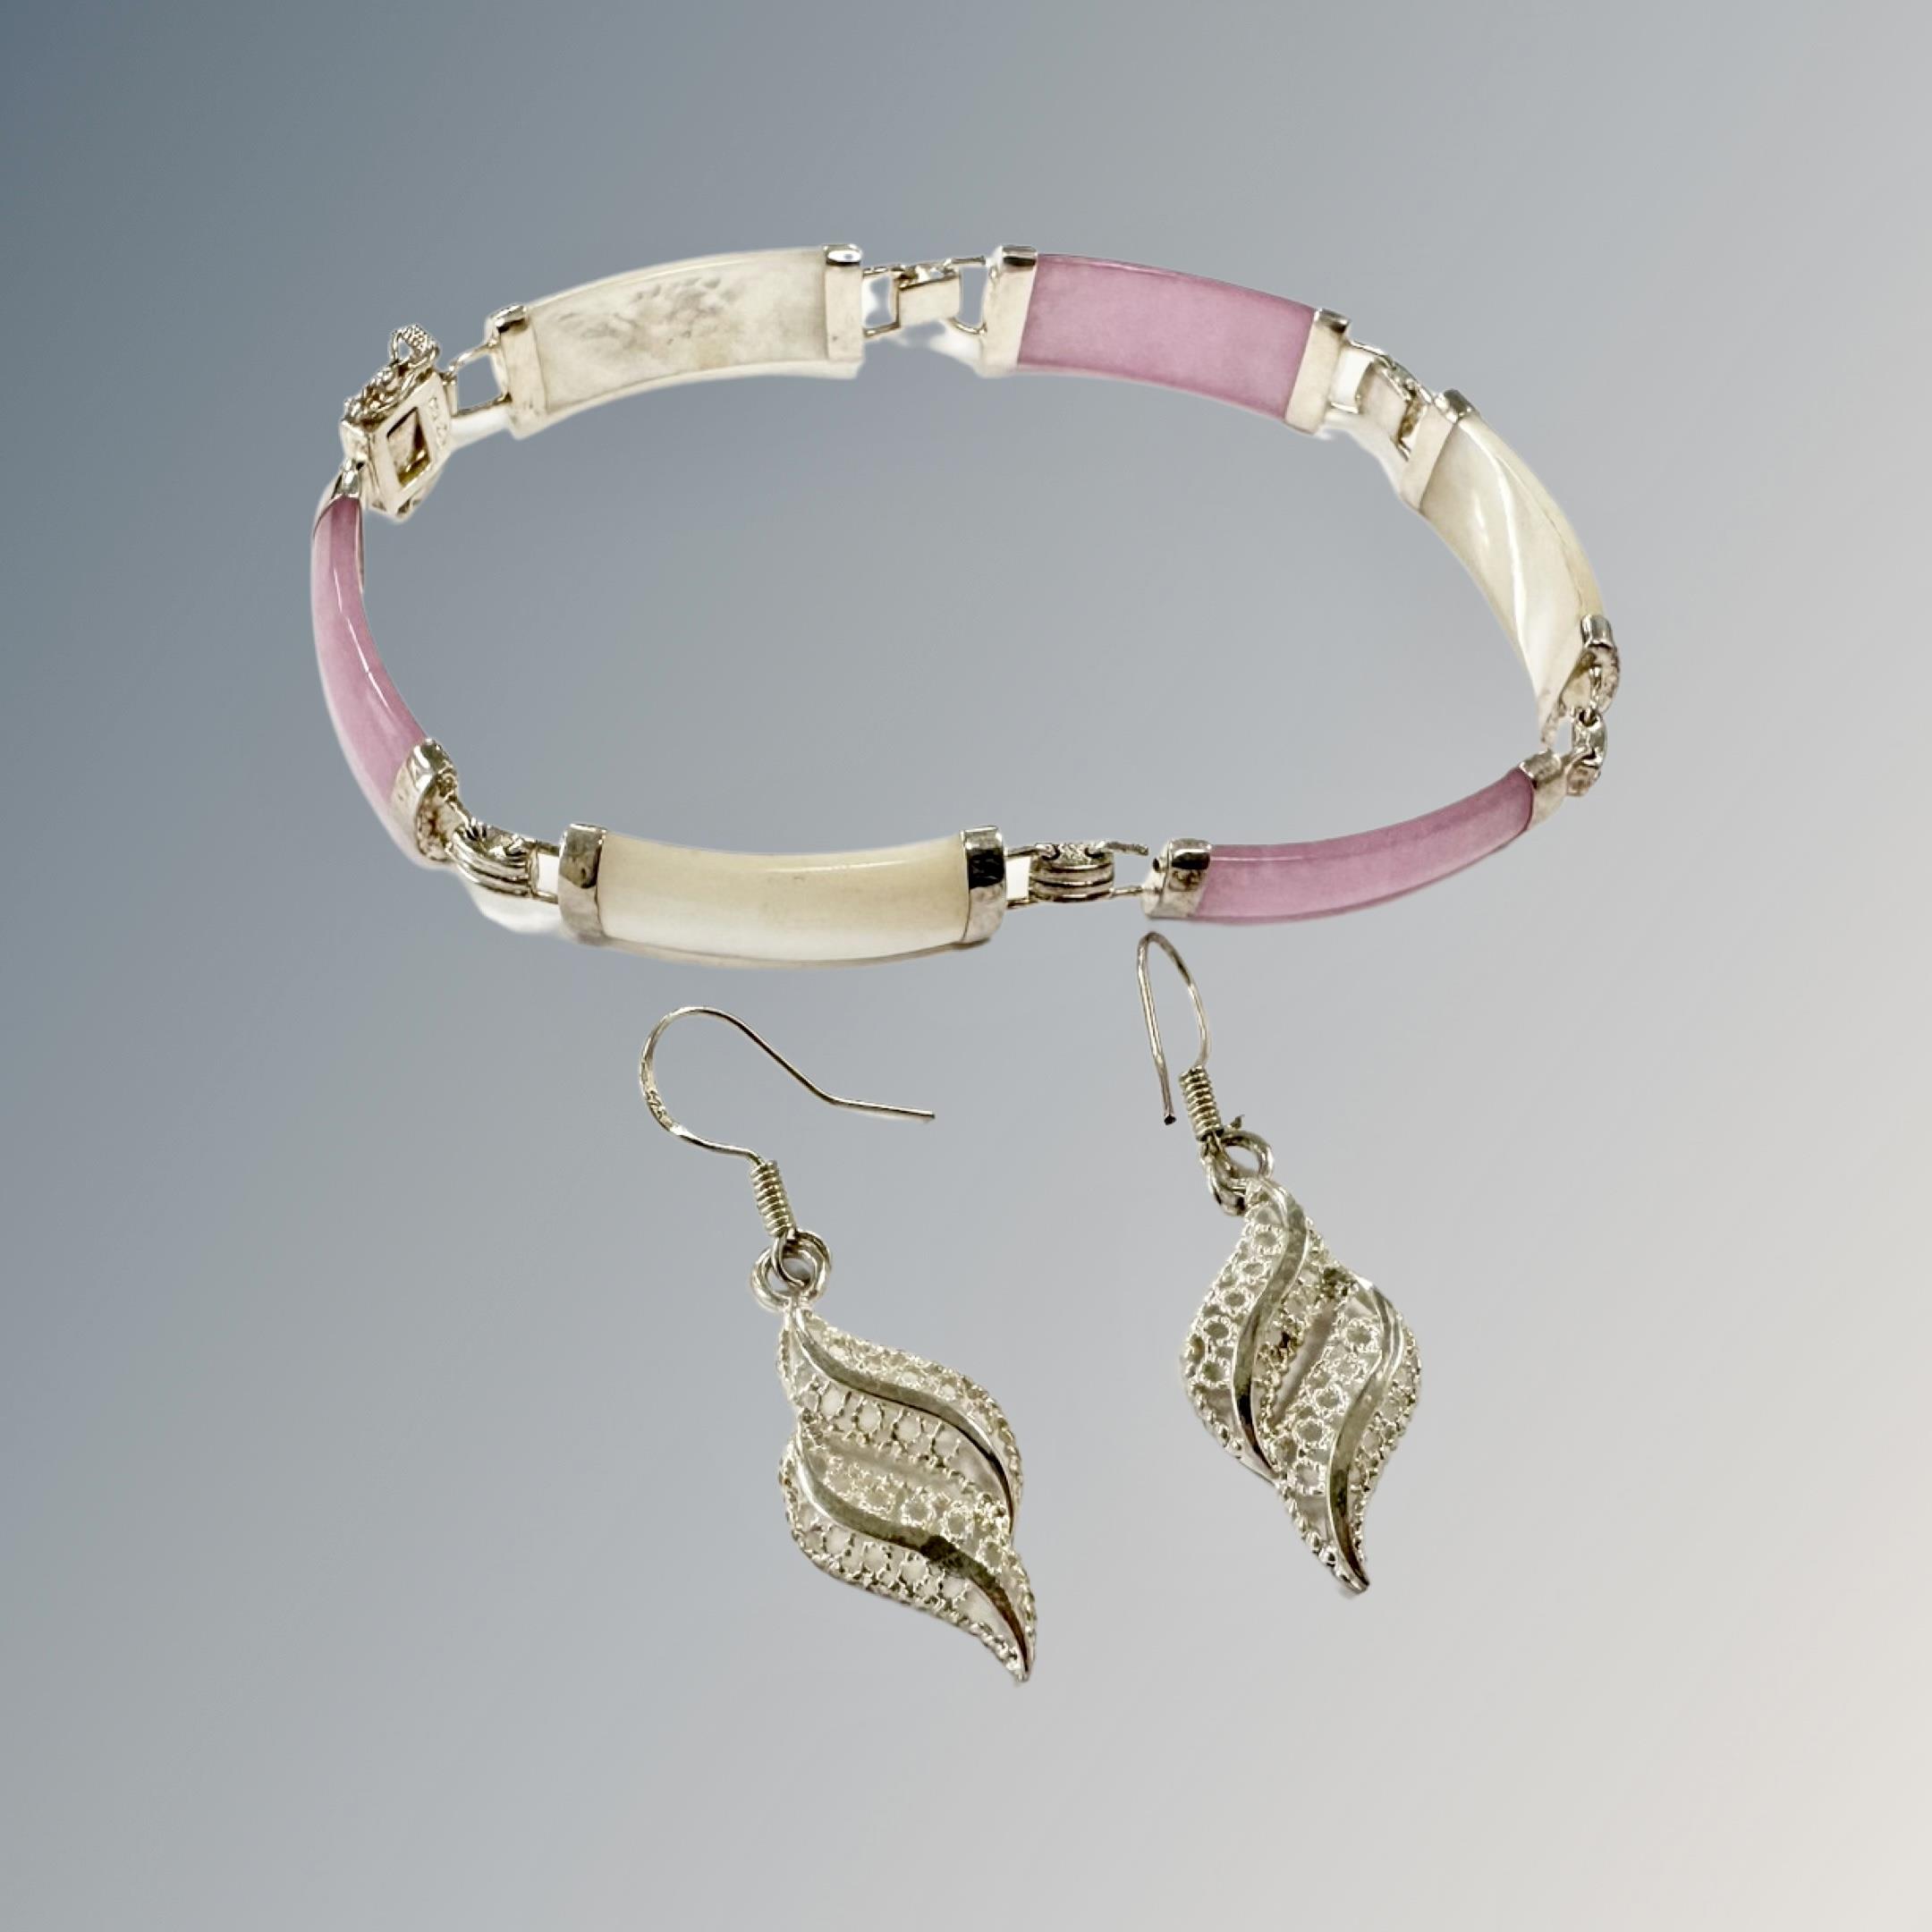 A silver stone set bracelet and a pair of earrings